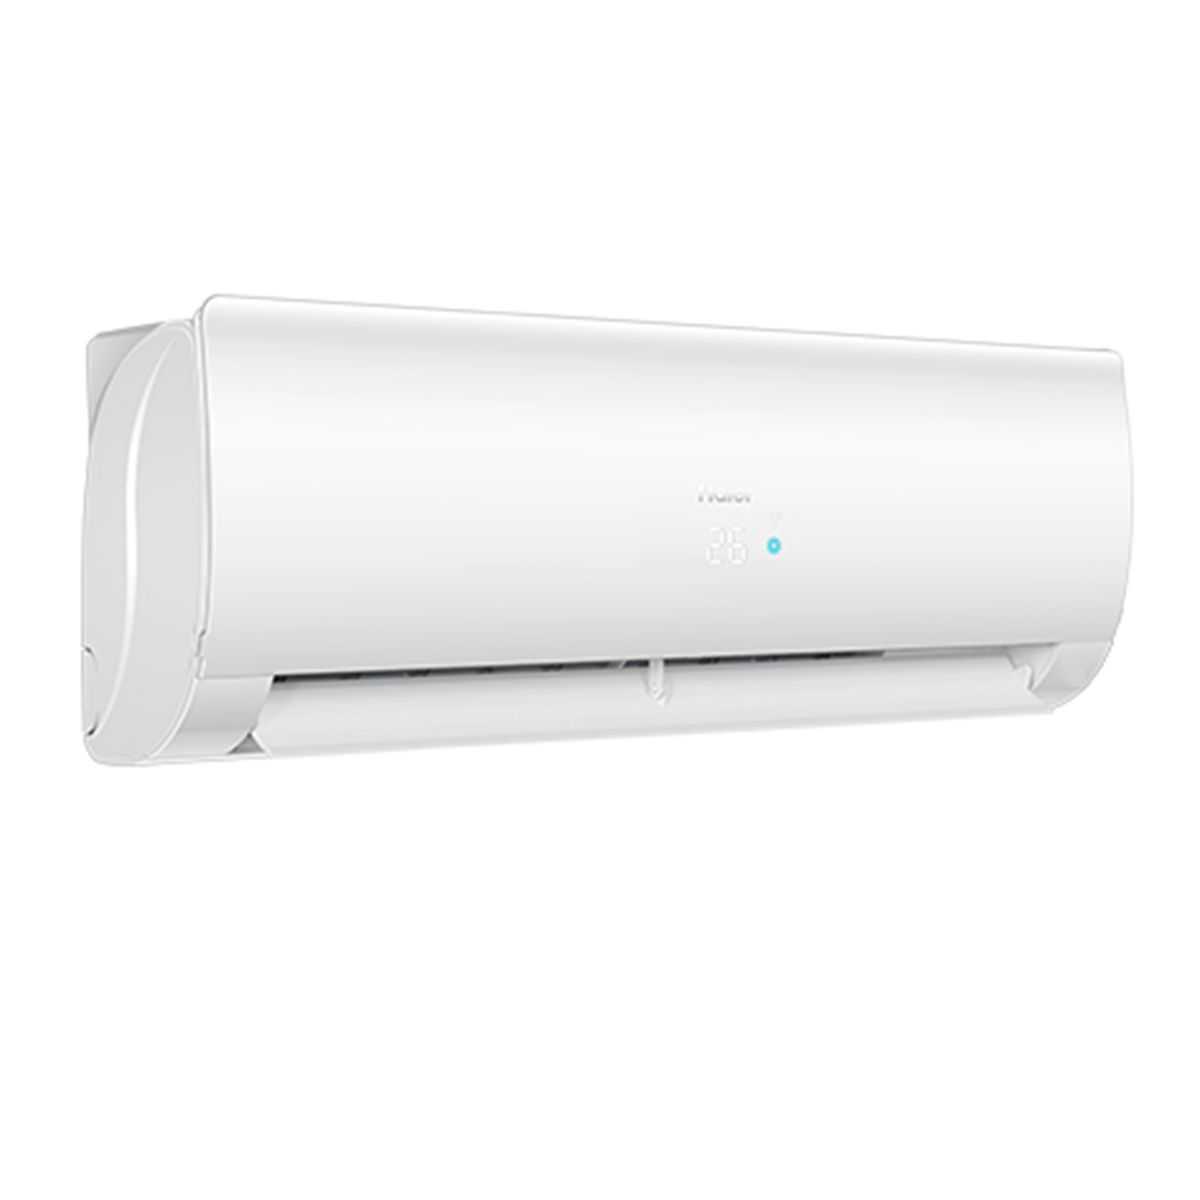 Haier Split Air Conditioner, 1.5H, Cooling and Heating, Inverter, White - HSU-12KHSID